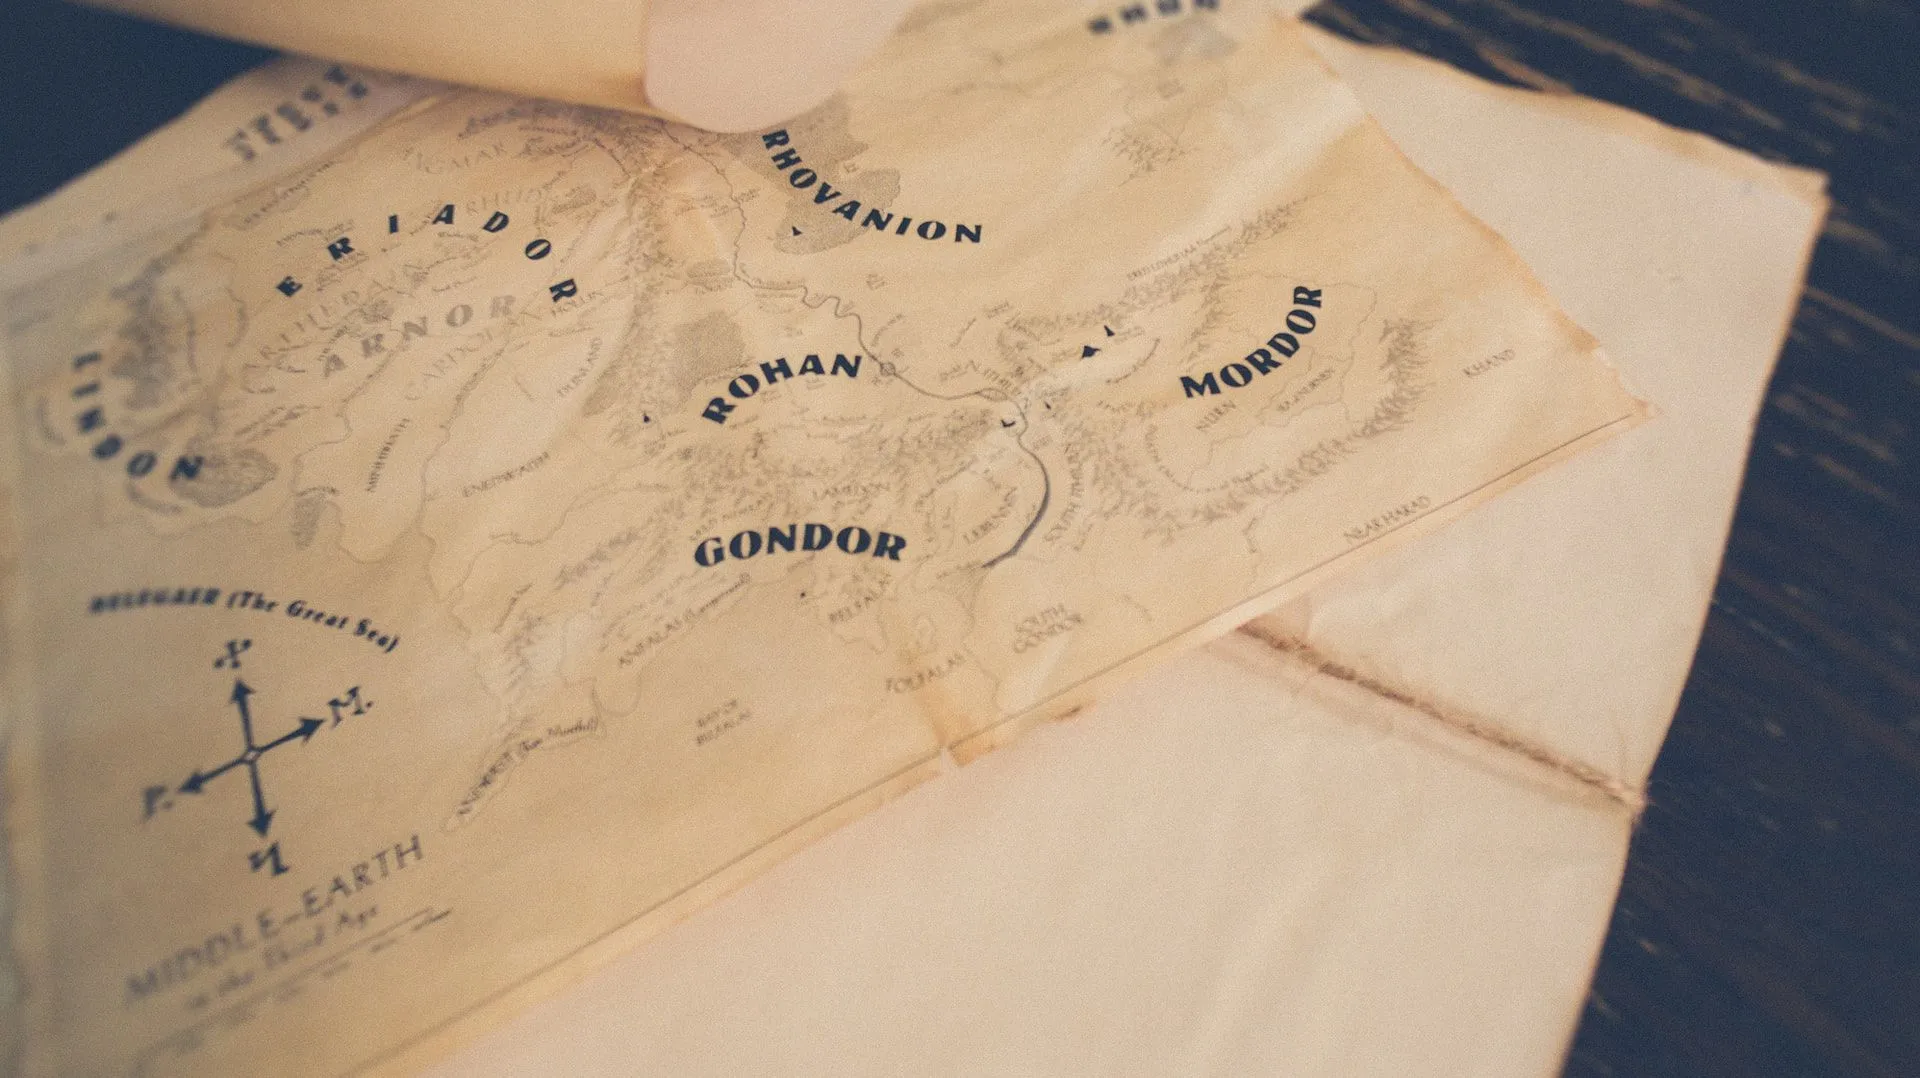 Gondor Mordor map from the Lord of the rings